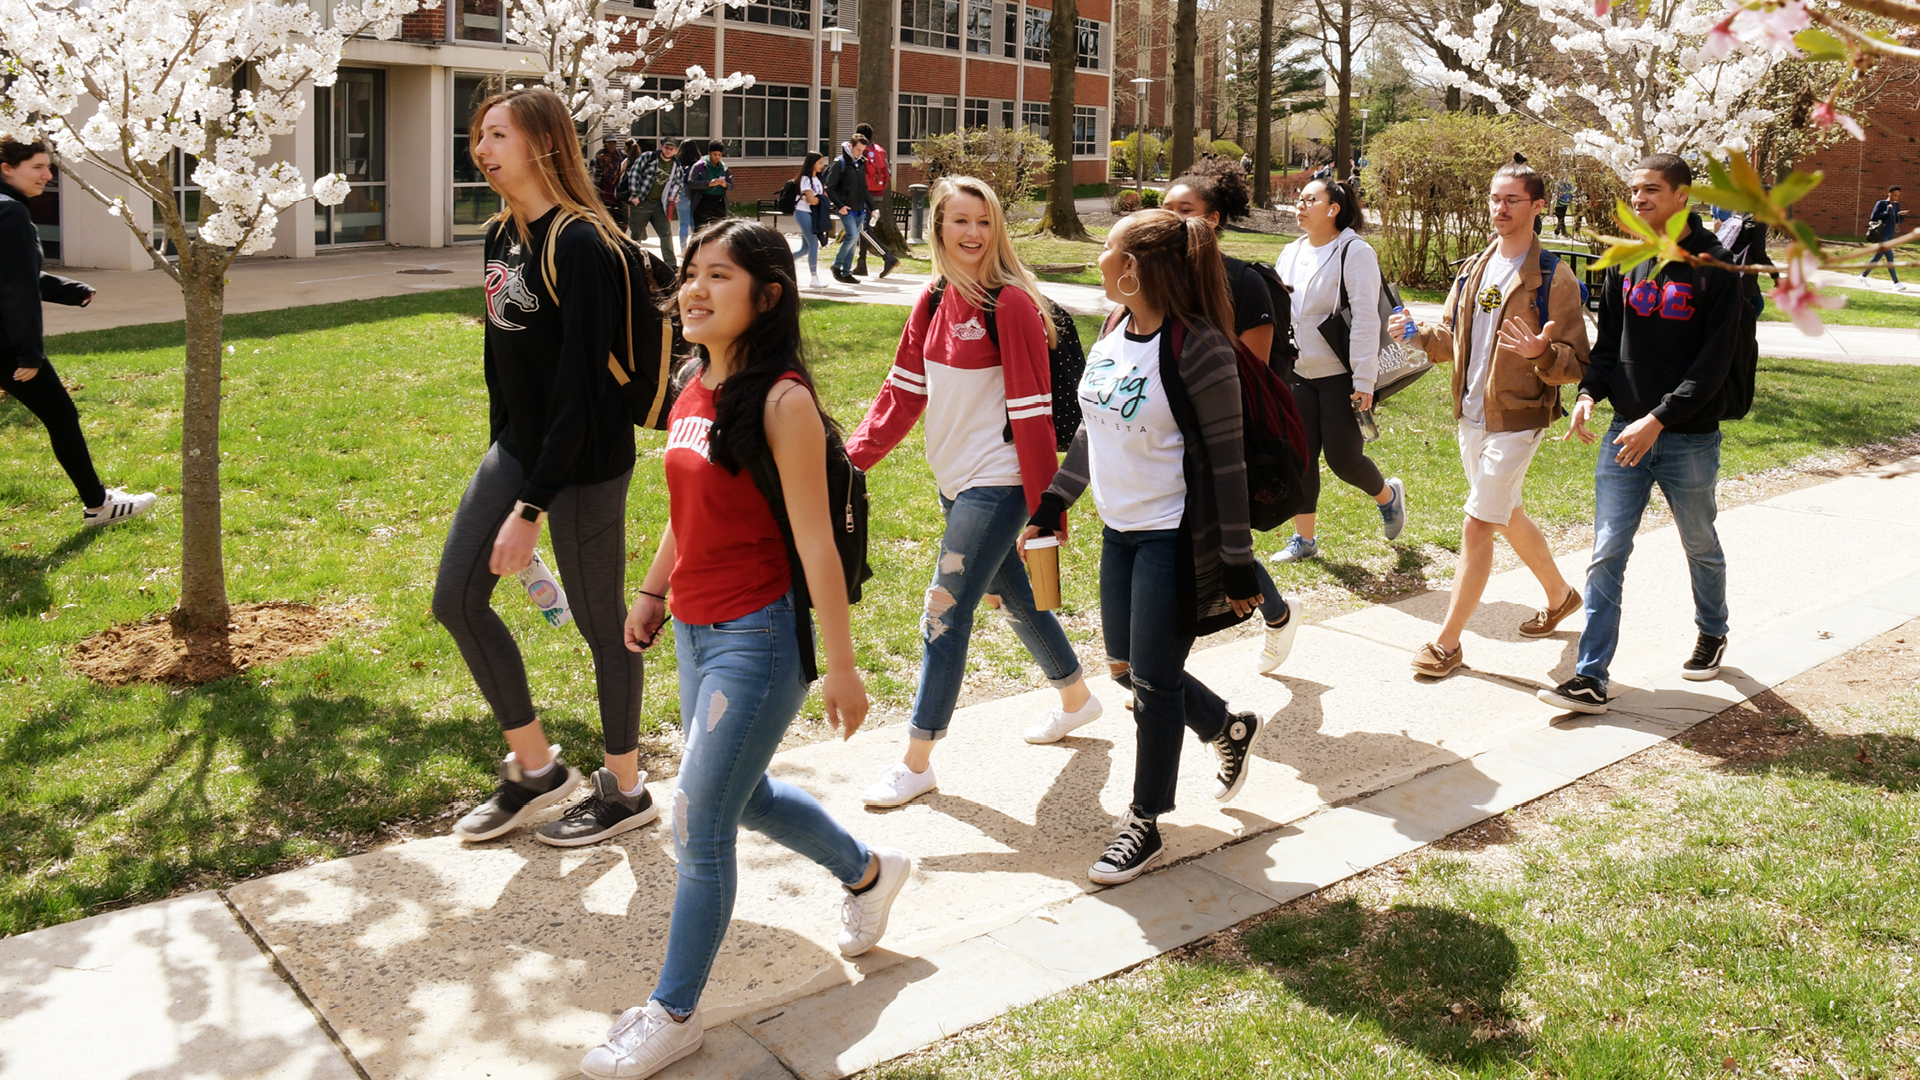 Rider students walk together on campus